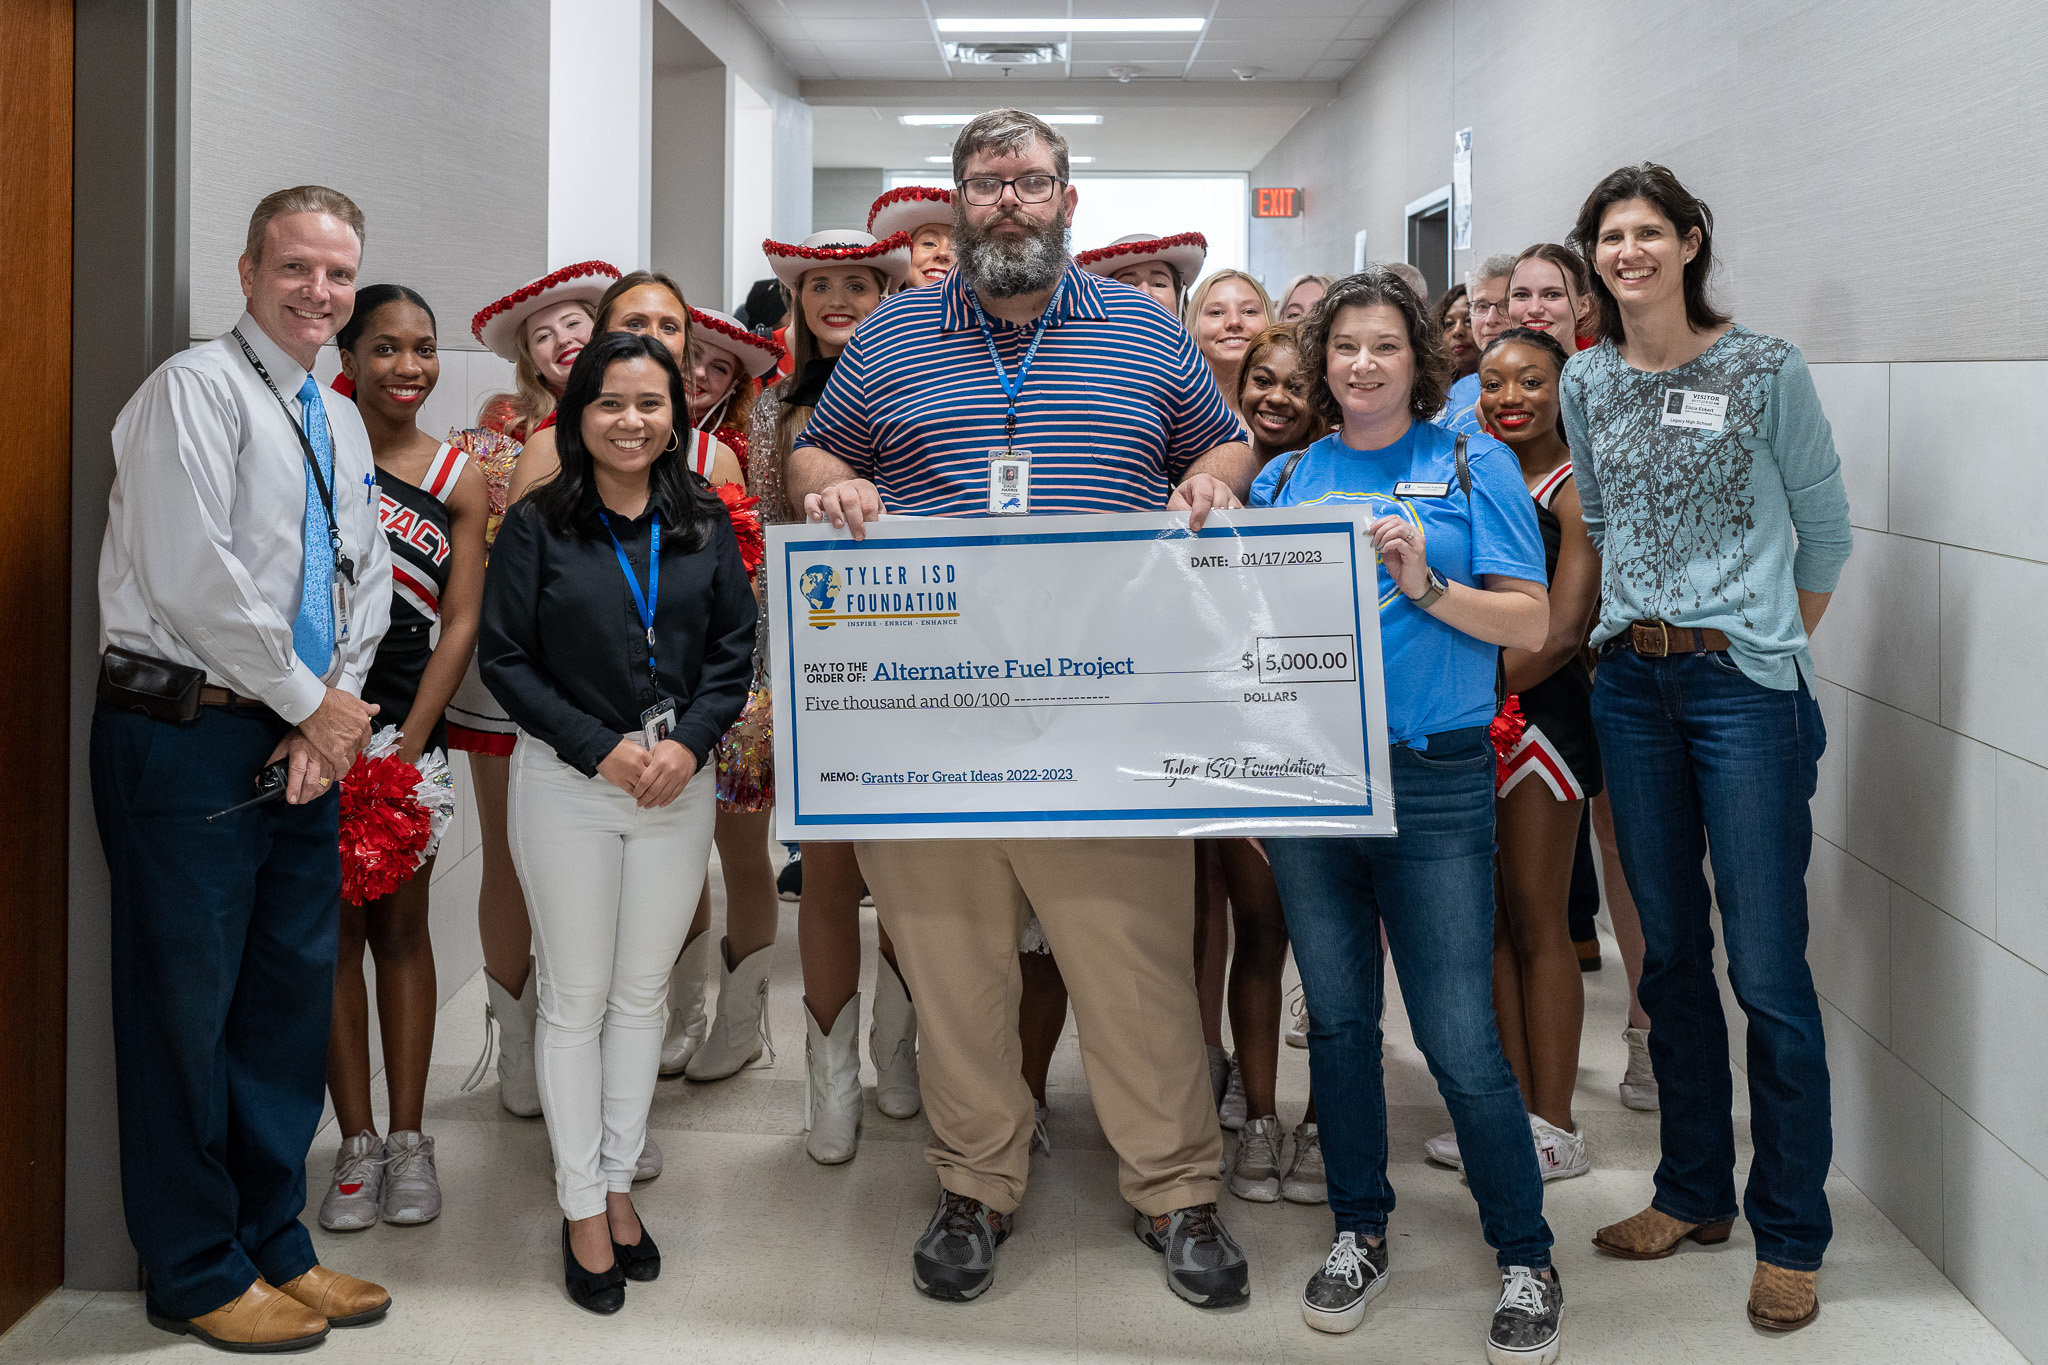 group of people standing in a hallway holding a giant check